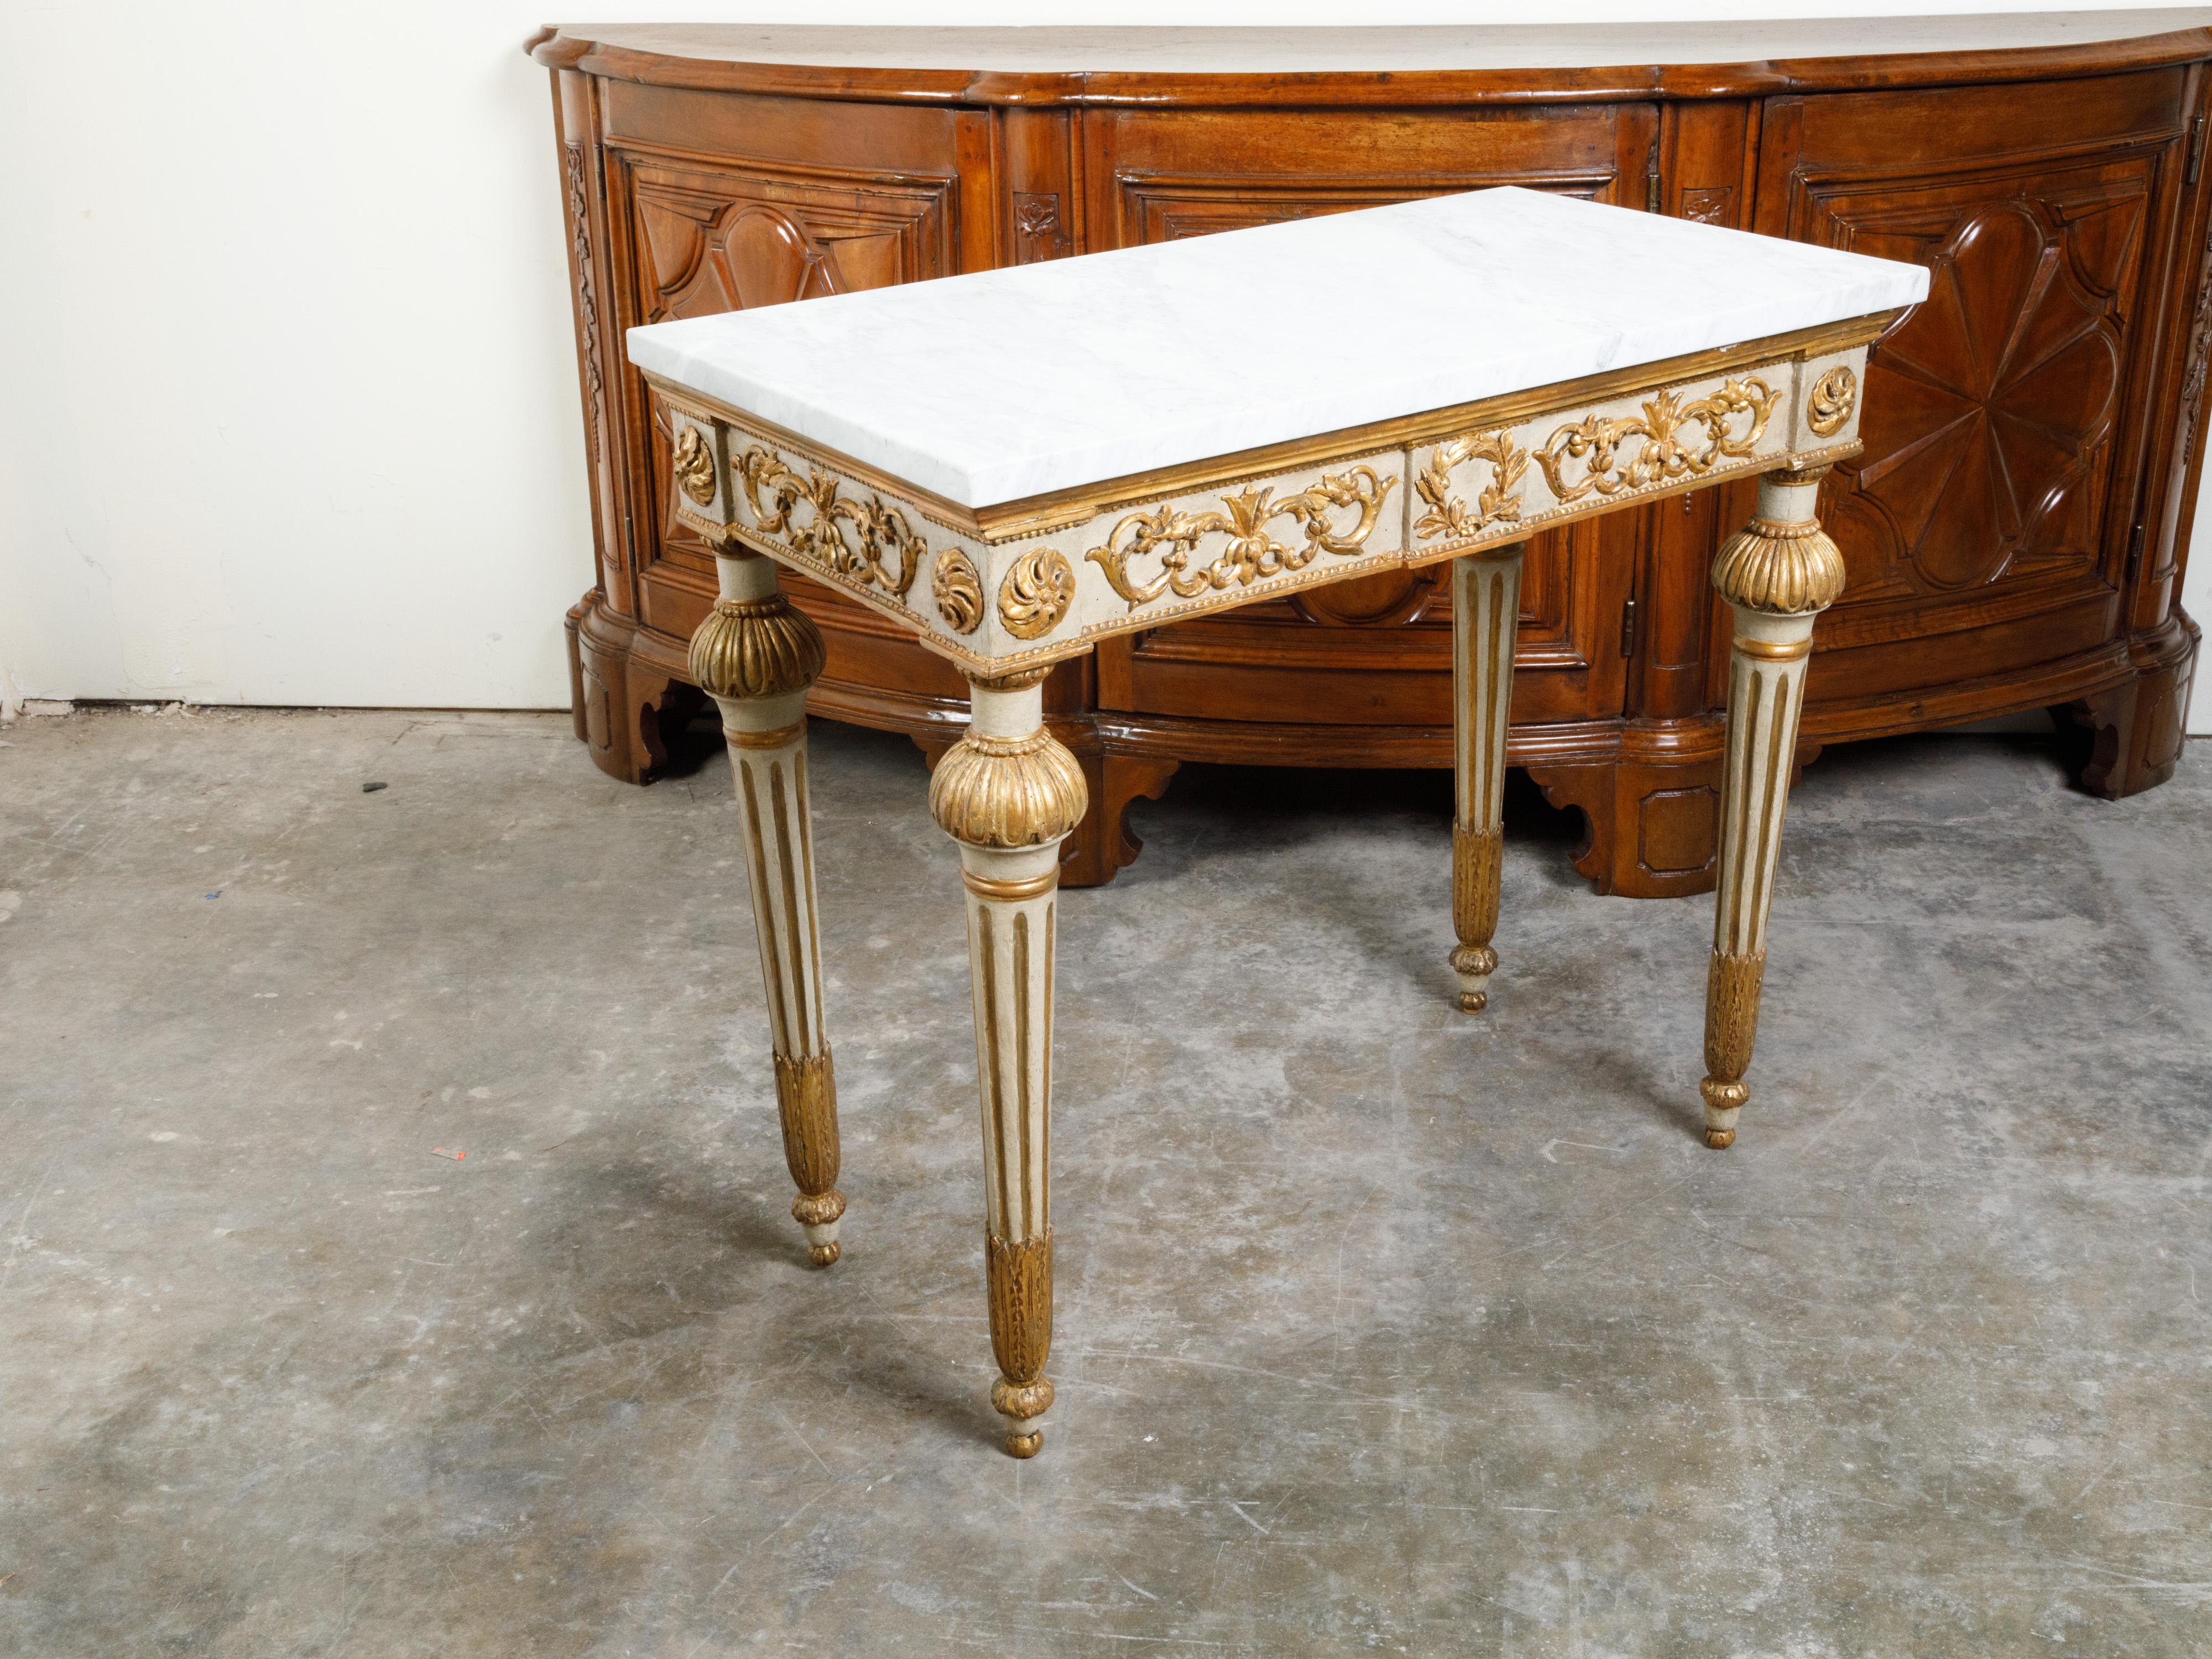 Italian 18th Century Neoclassical Carved and Gilt Console Table with Marble Top For Sale 4